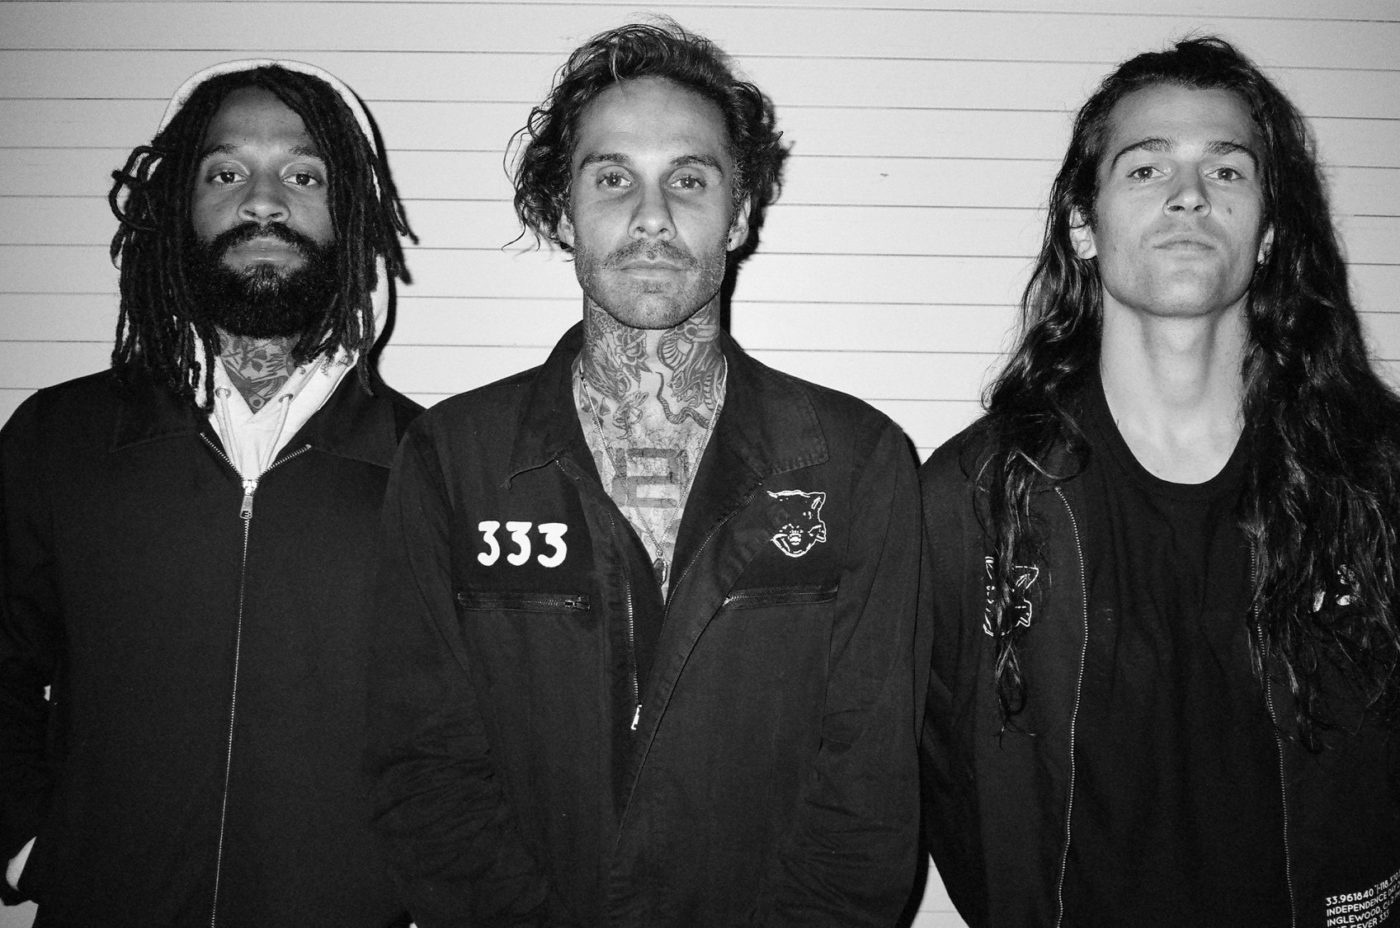 FEVER 333 – fuori ora l’EP “WRONG GENERATION”